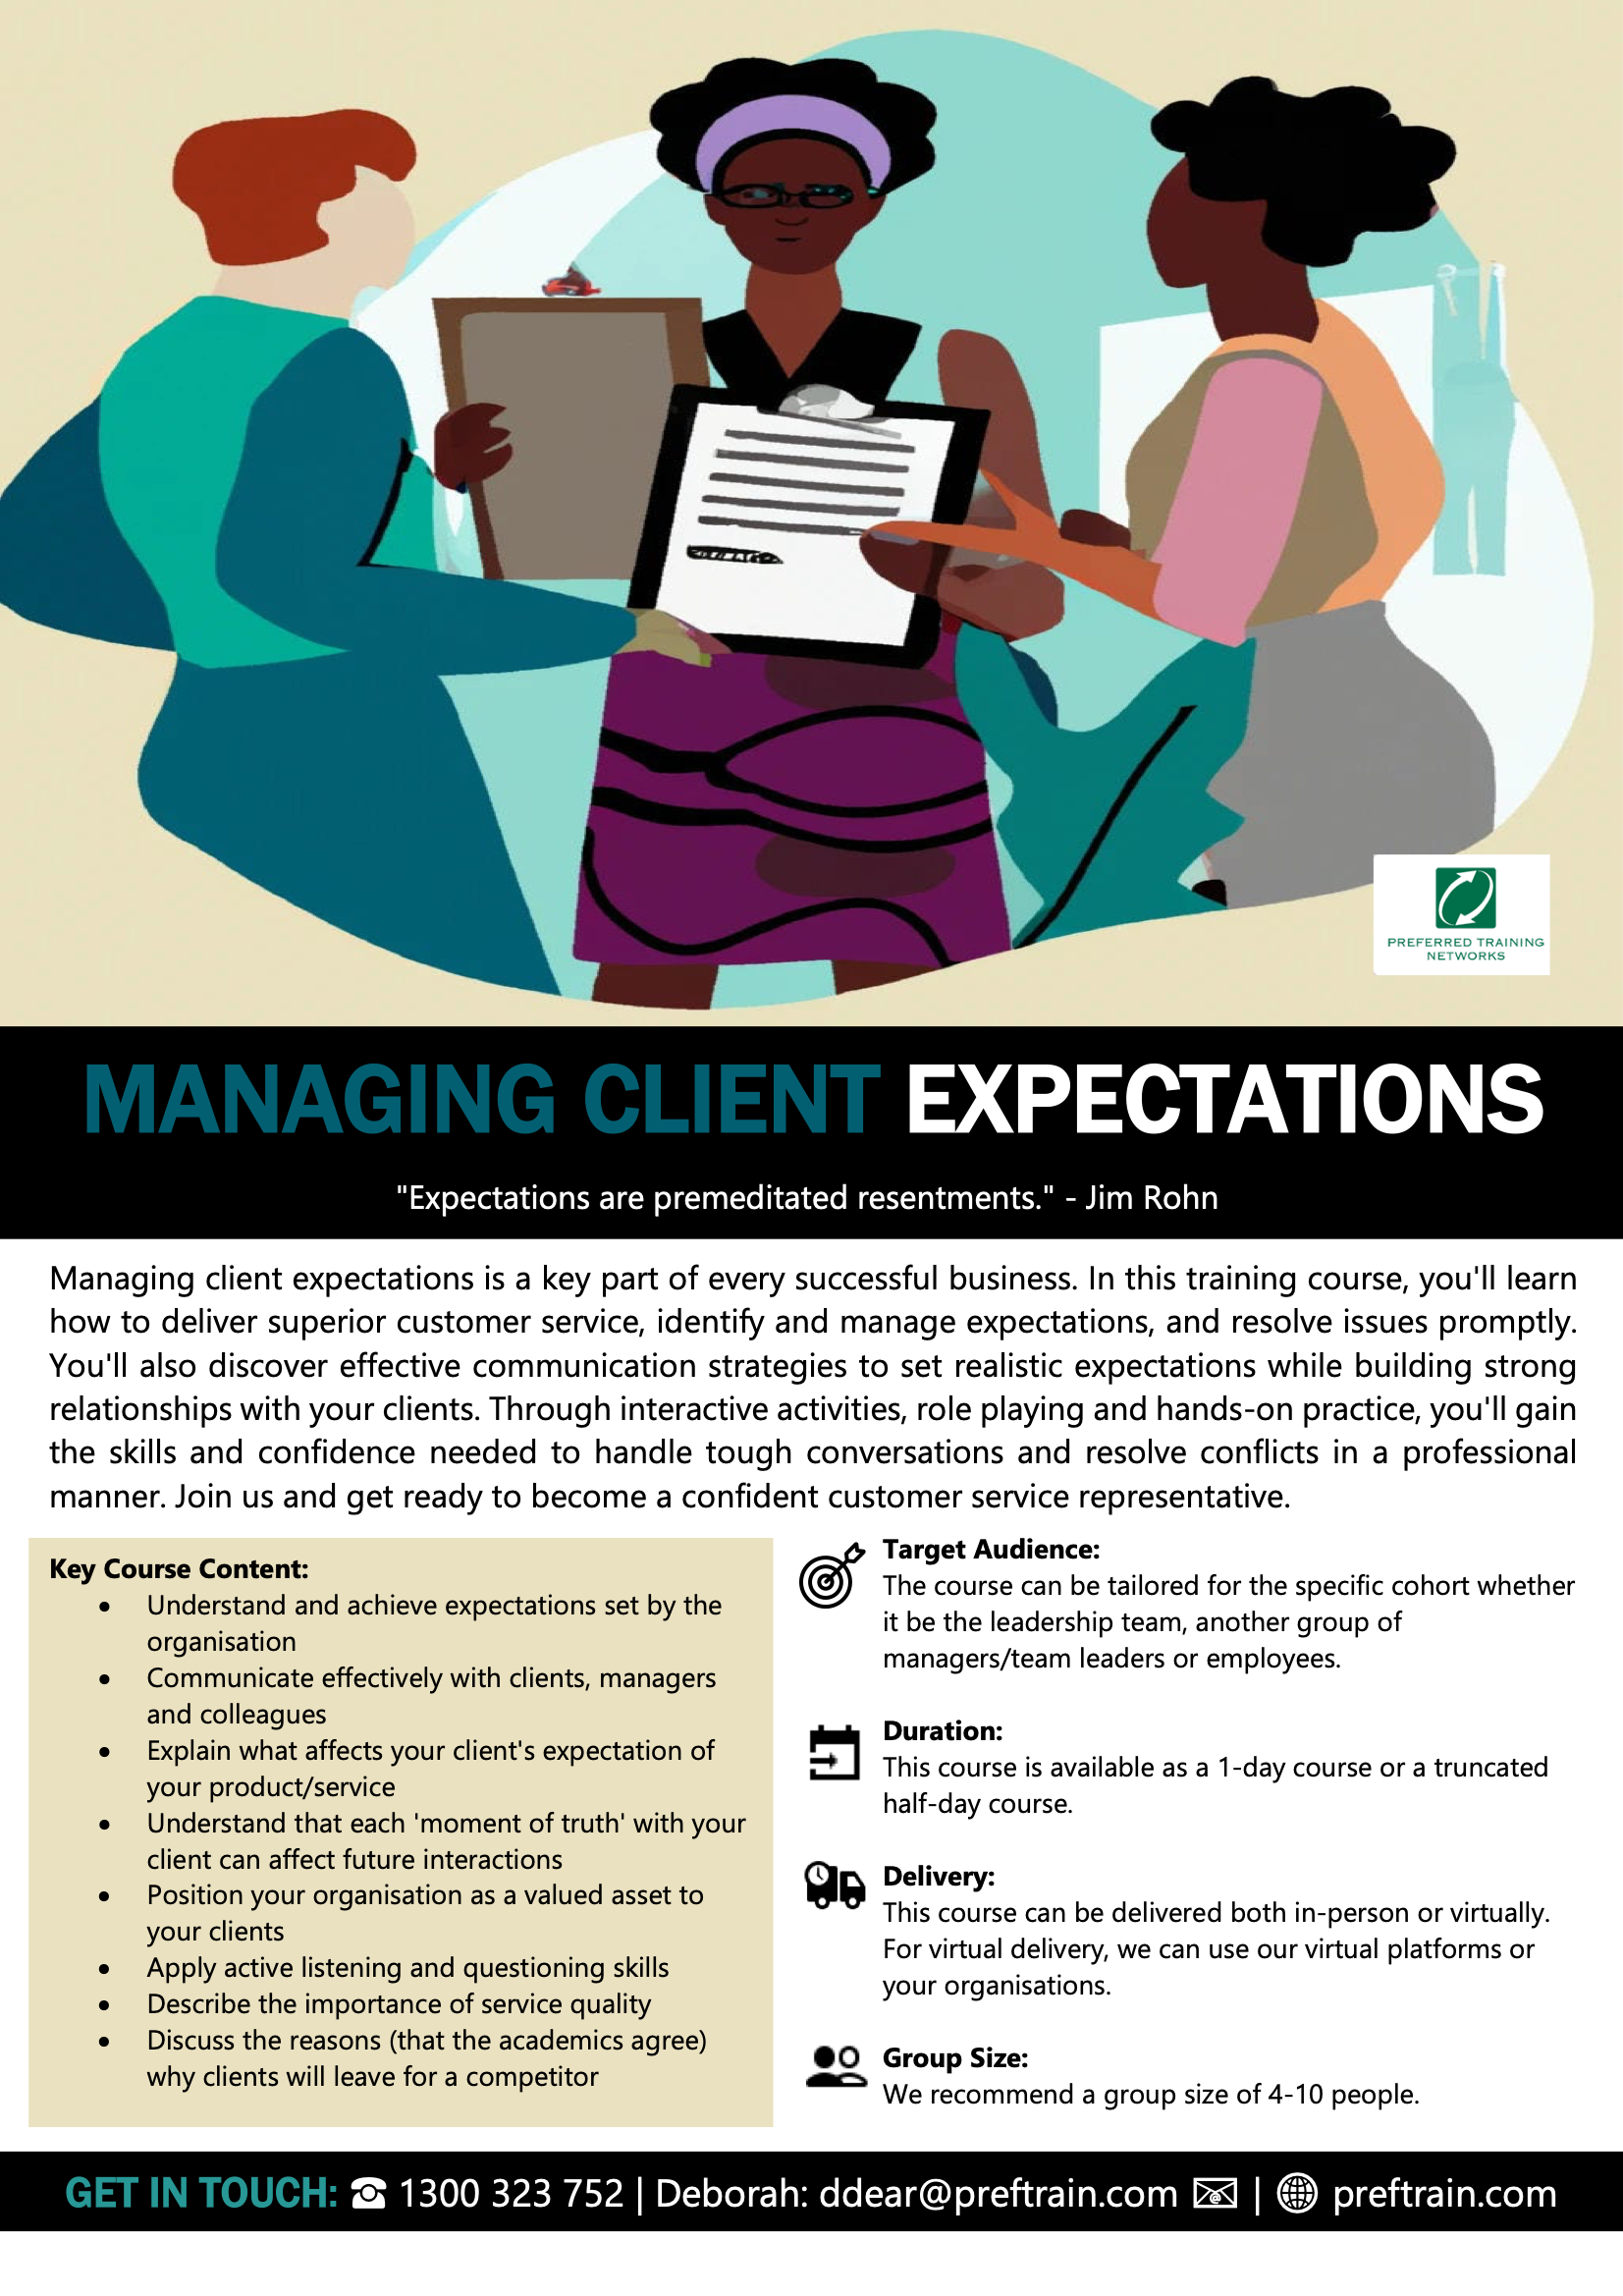 Managing Client Expectations